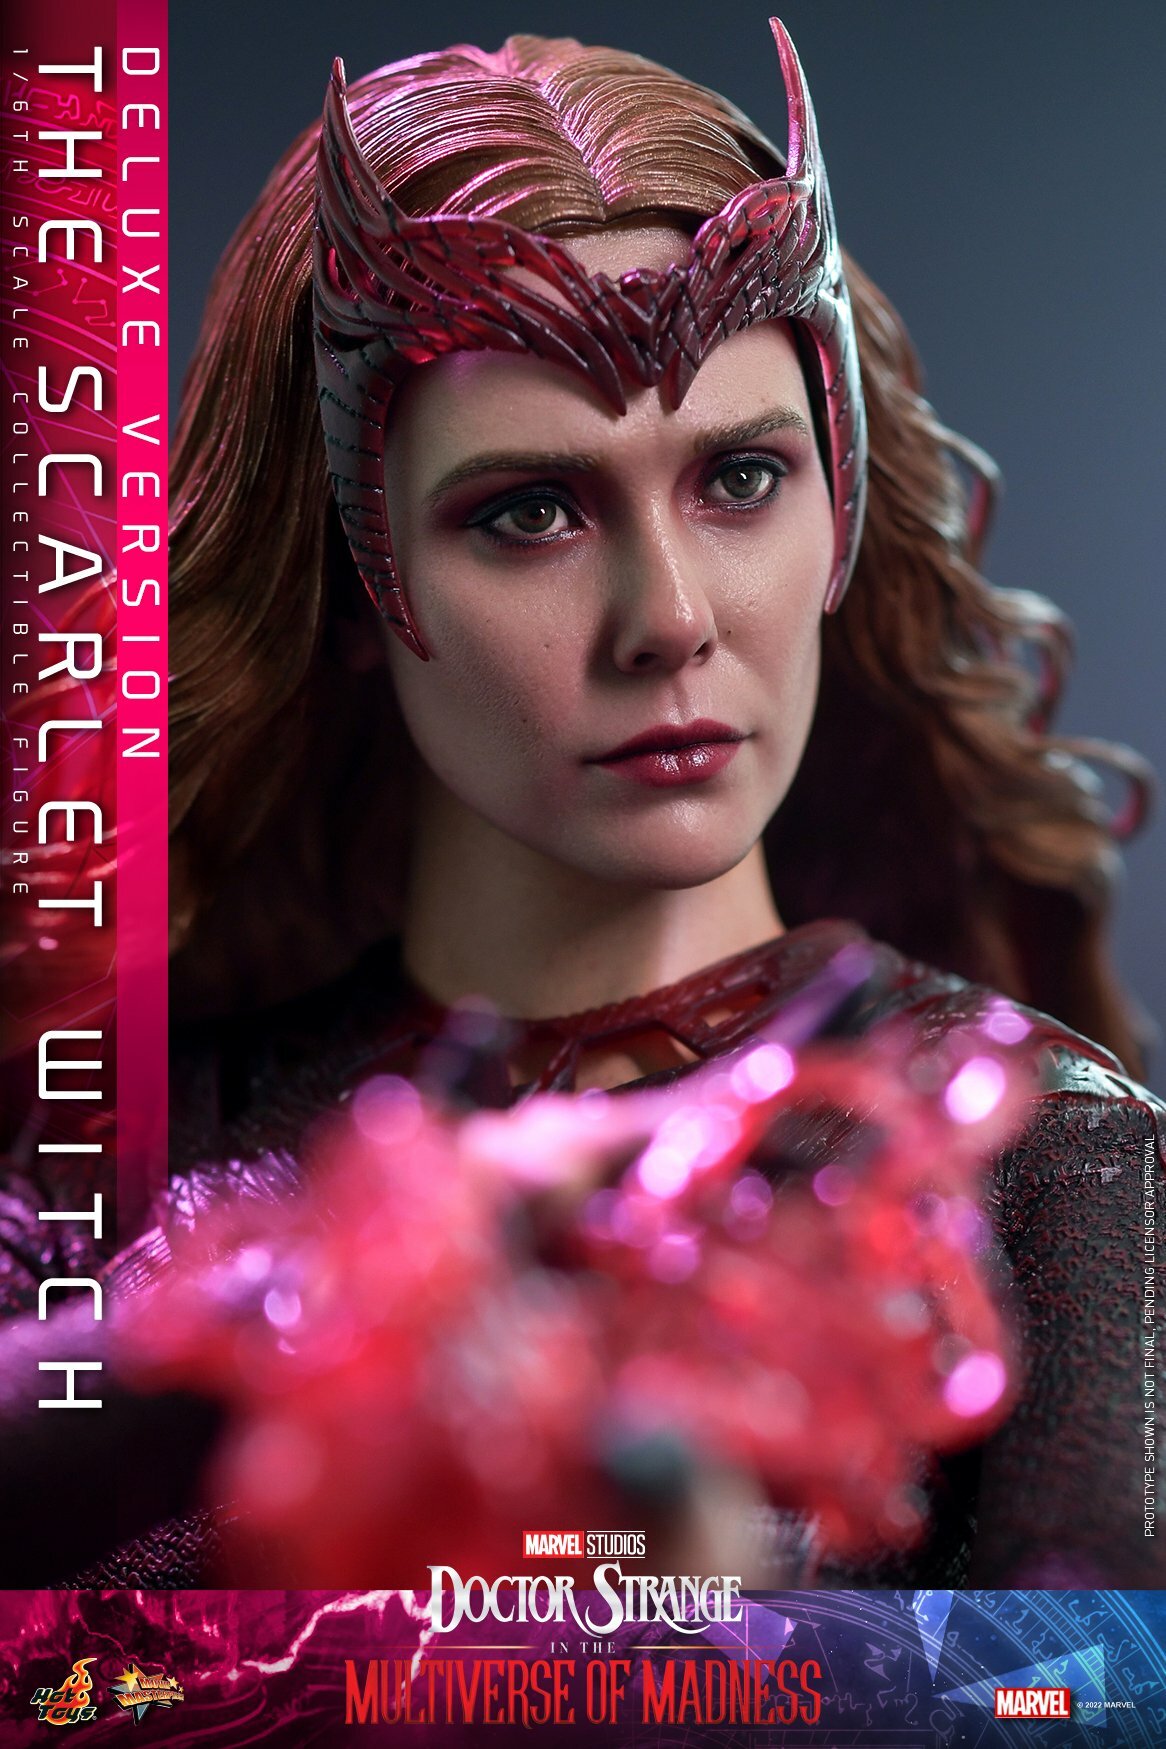 Hot-Toy-Multiverse-of-Madness-Scarlet-Witch-DX-012.jpg.19622a7ac406309977f334420fd0c9d6.jpg